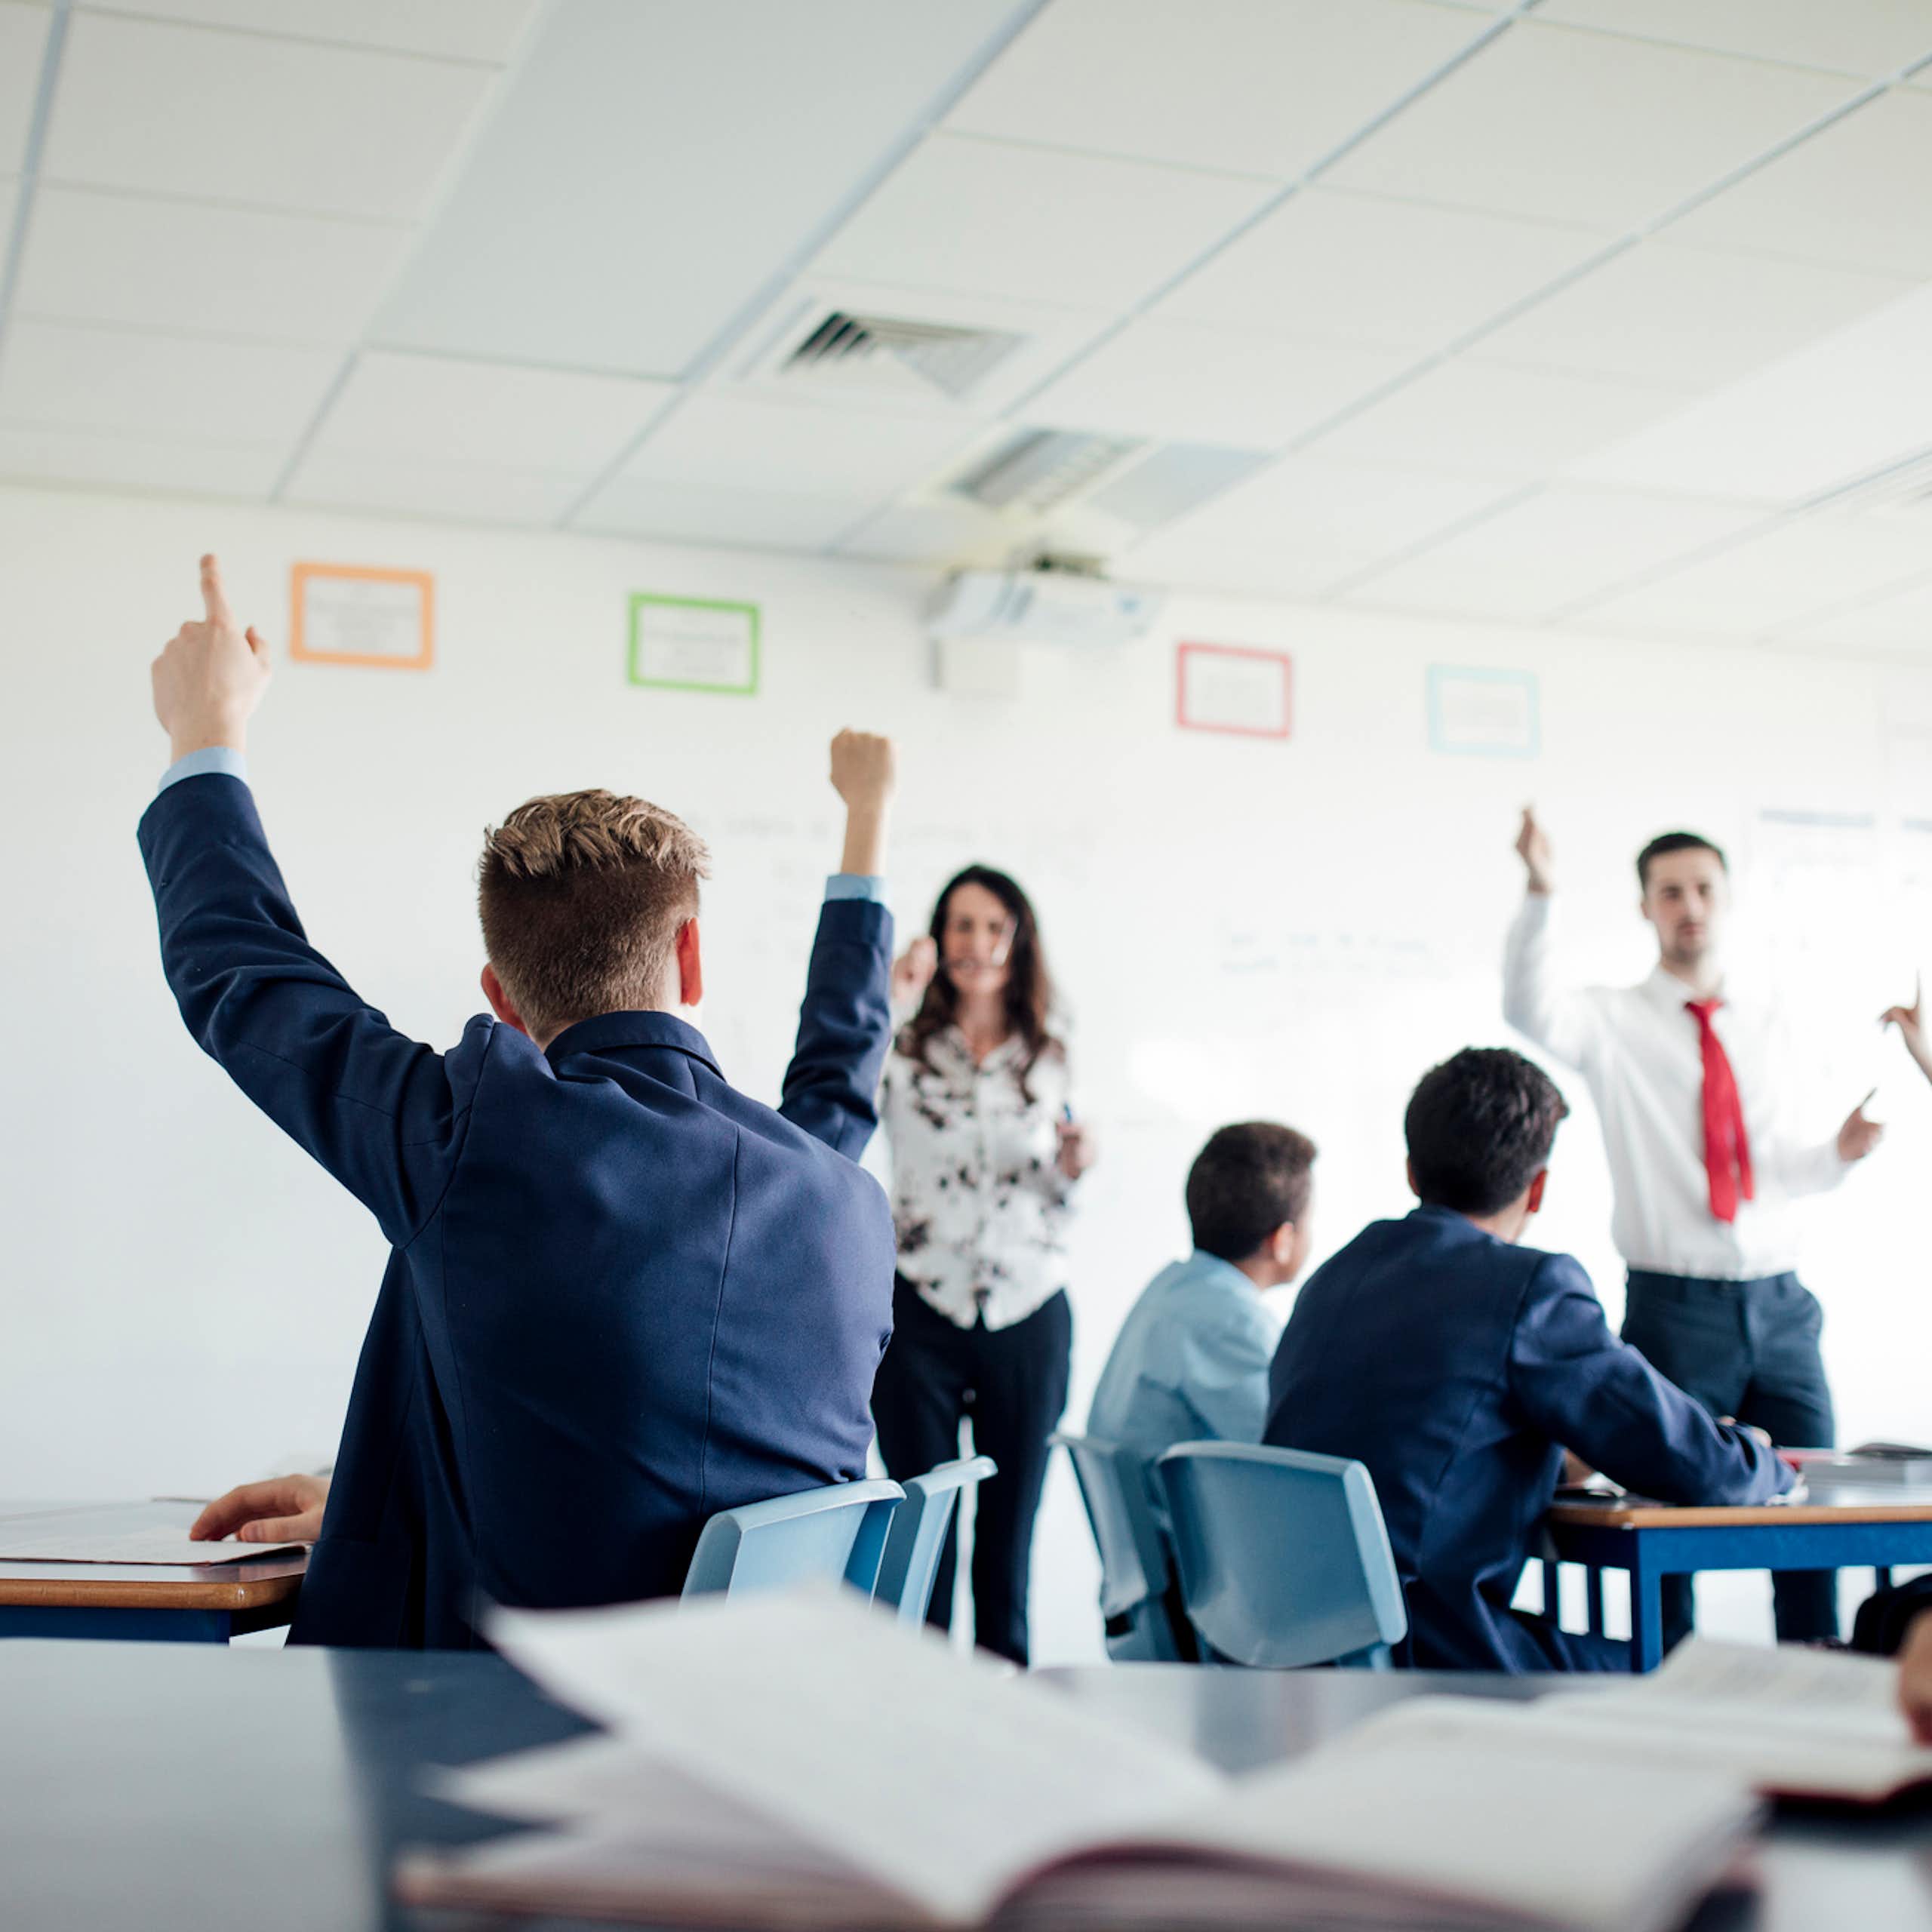 Students raise their hands in a classroom. Two teachers stand at the front of the students.